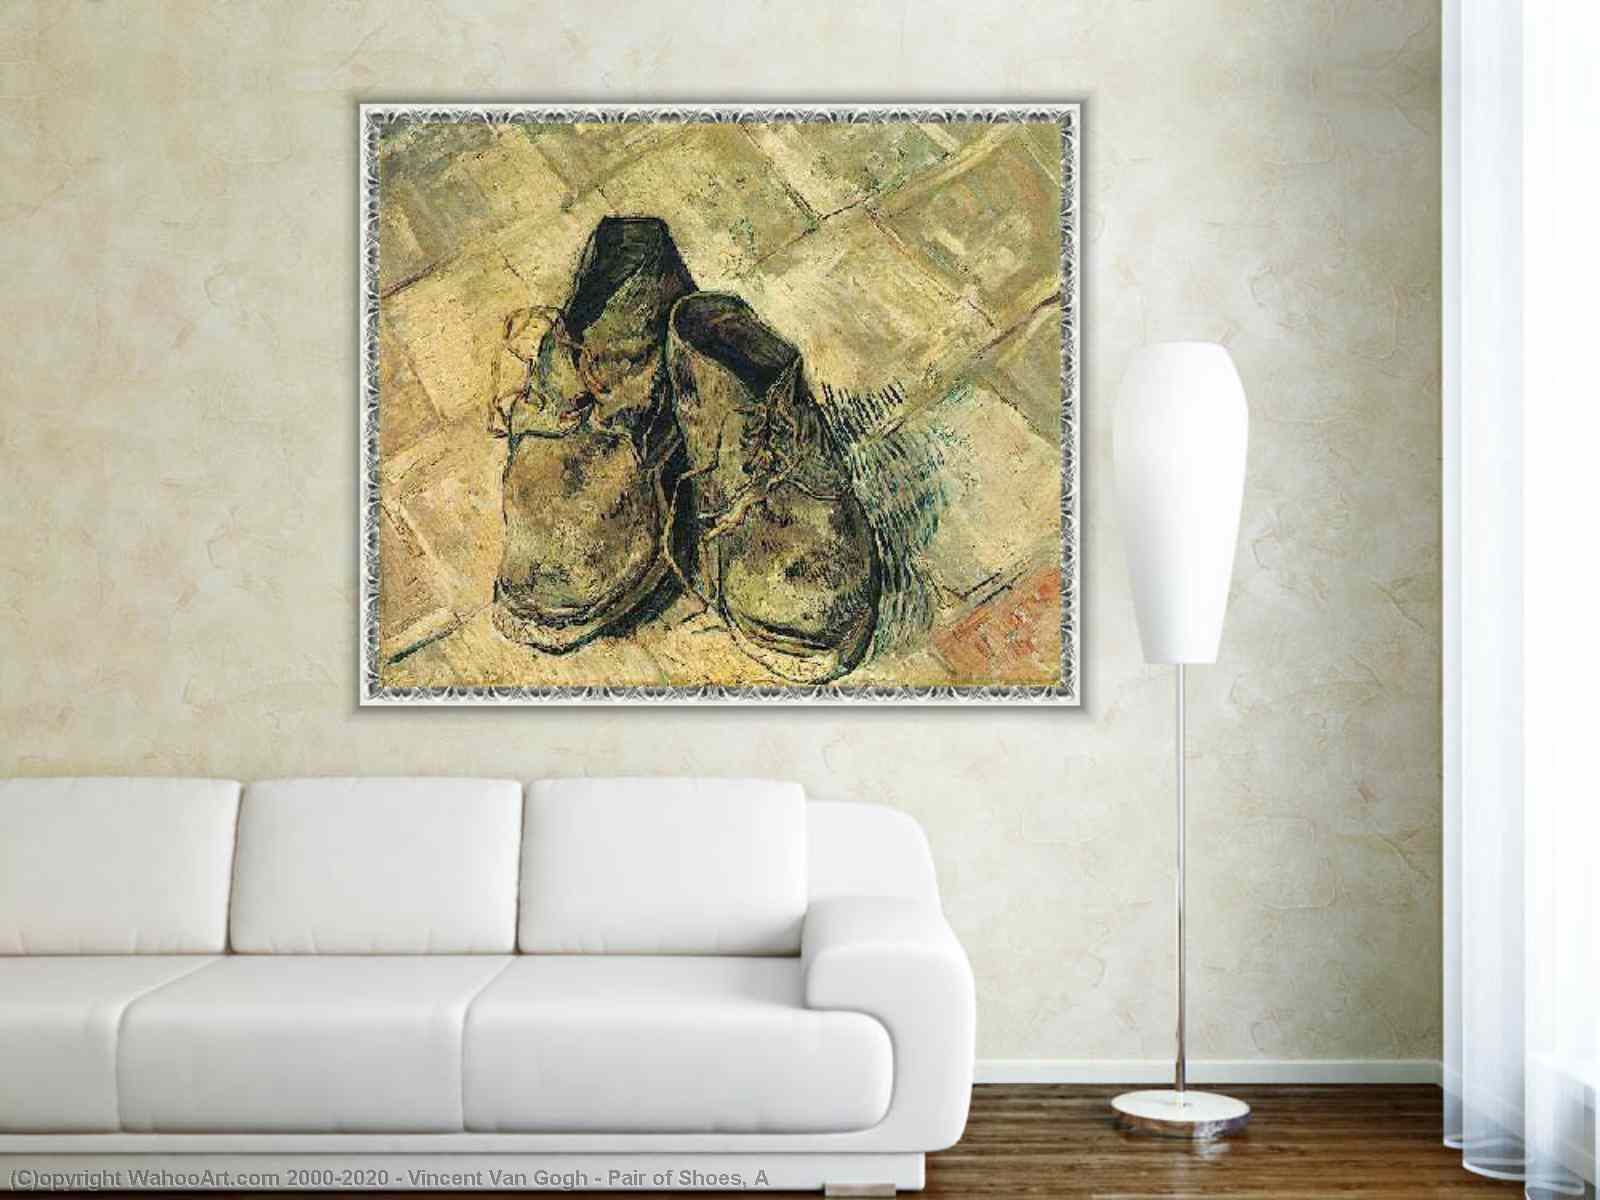 Paintings Reproductions | Pair of Shoes, A by Vincent Van Gogh |  